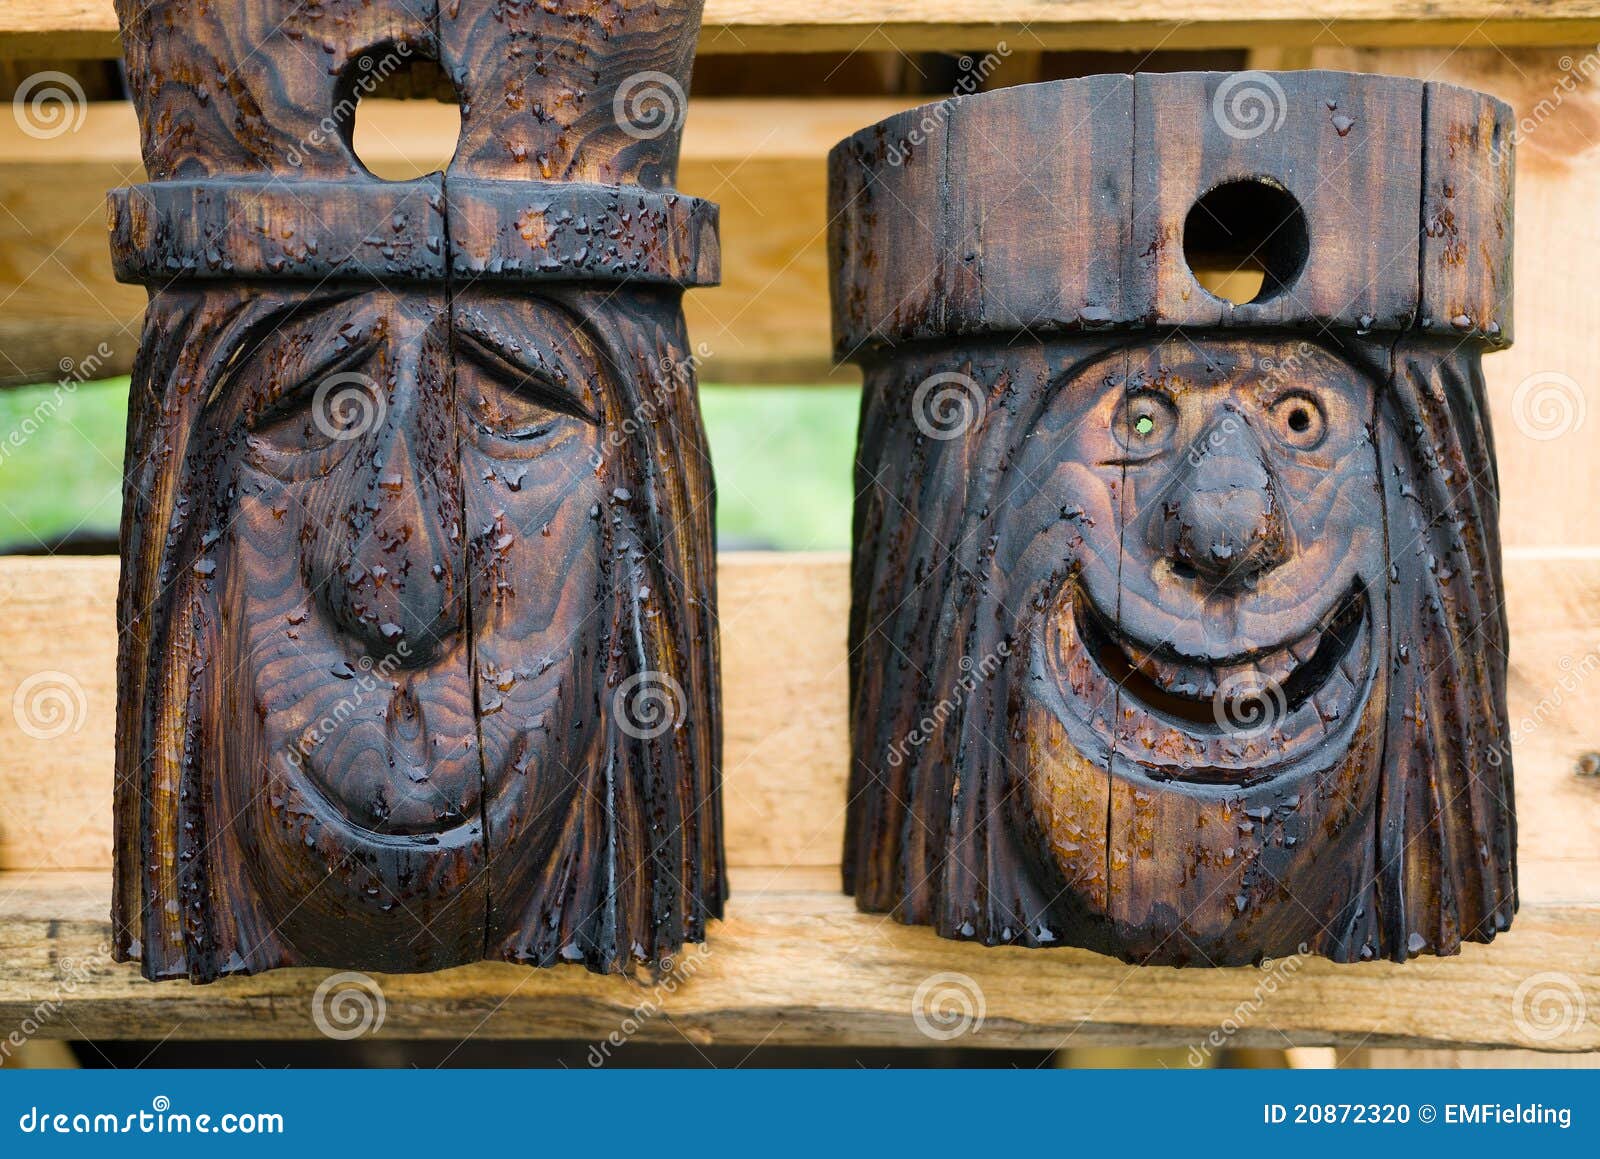 Carved Faces Birdhouses stock photo. Image of wood, nature 